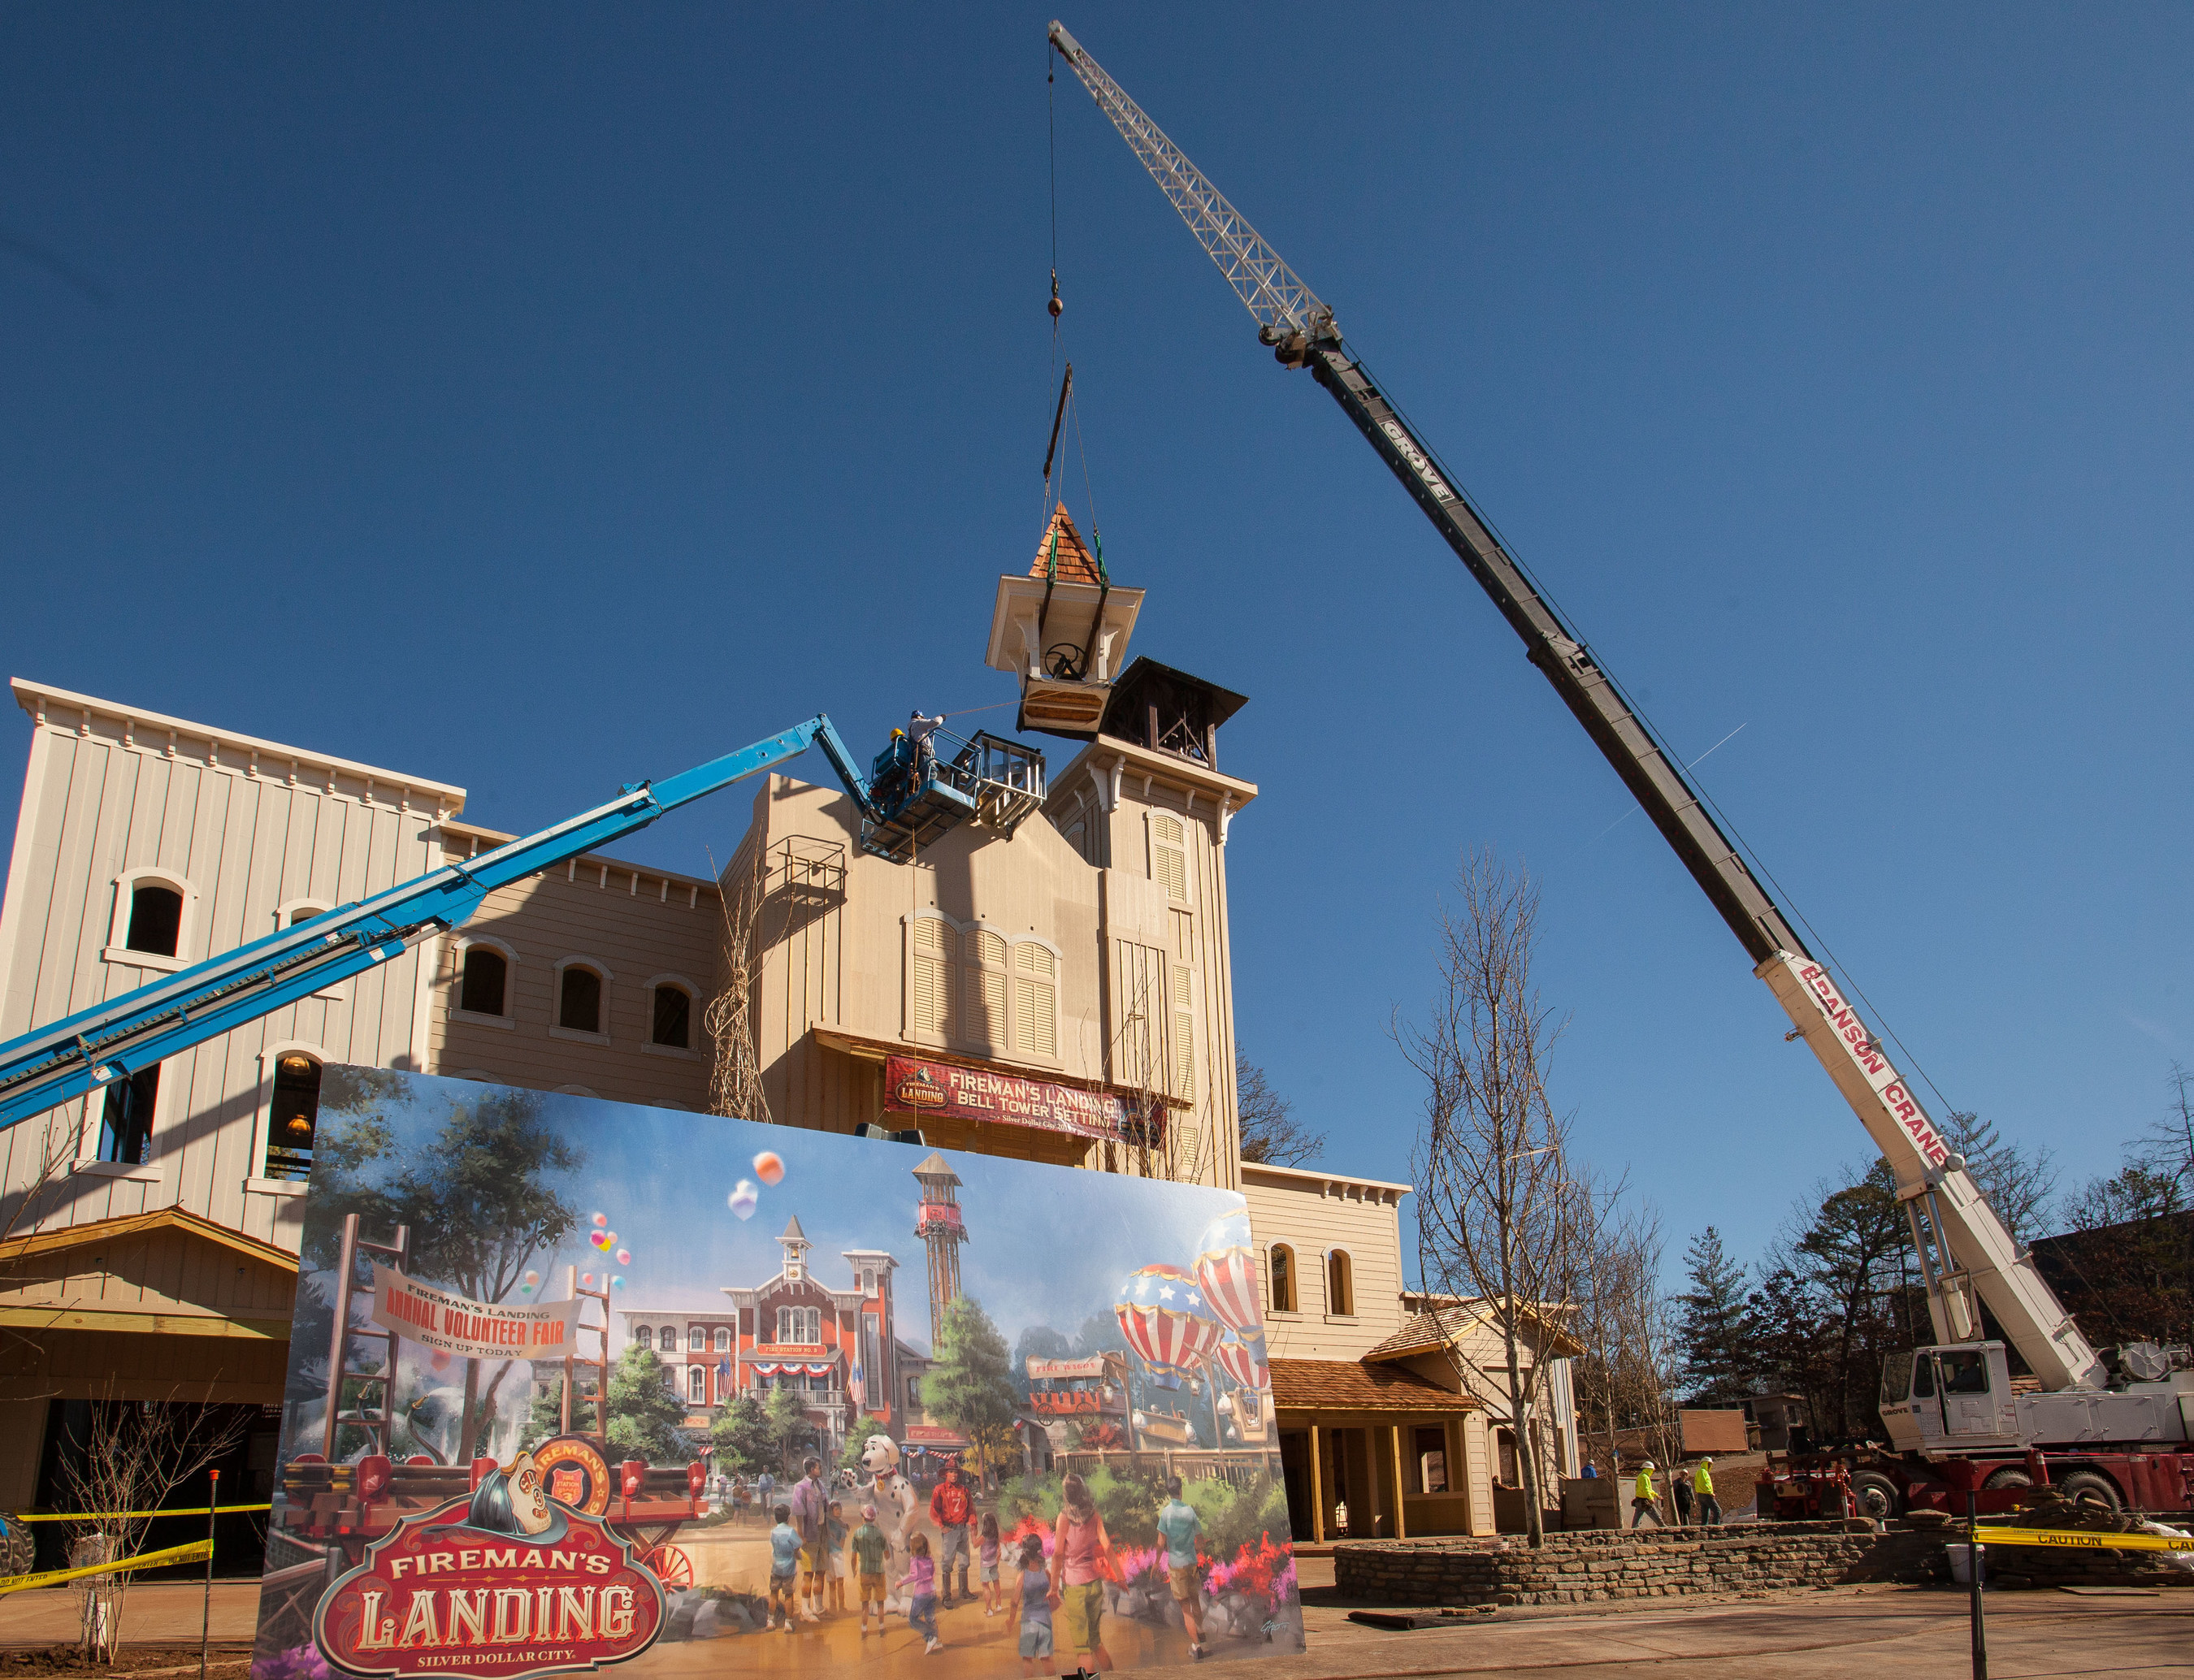 The setting the bell tower marks progress on the $8 million all-new themed area Fireman's Landing at Silver Dollar City in Branson, Missouri.